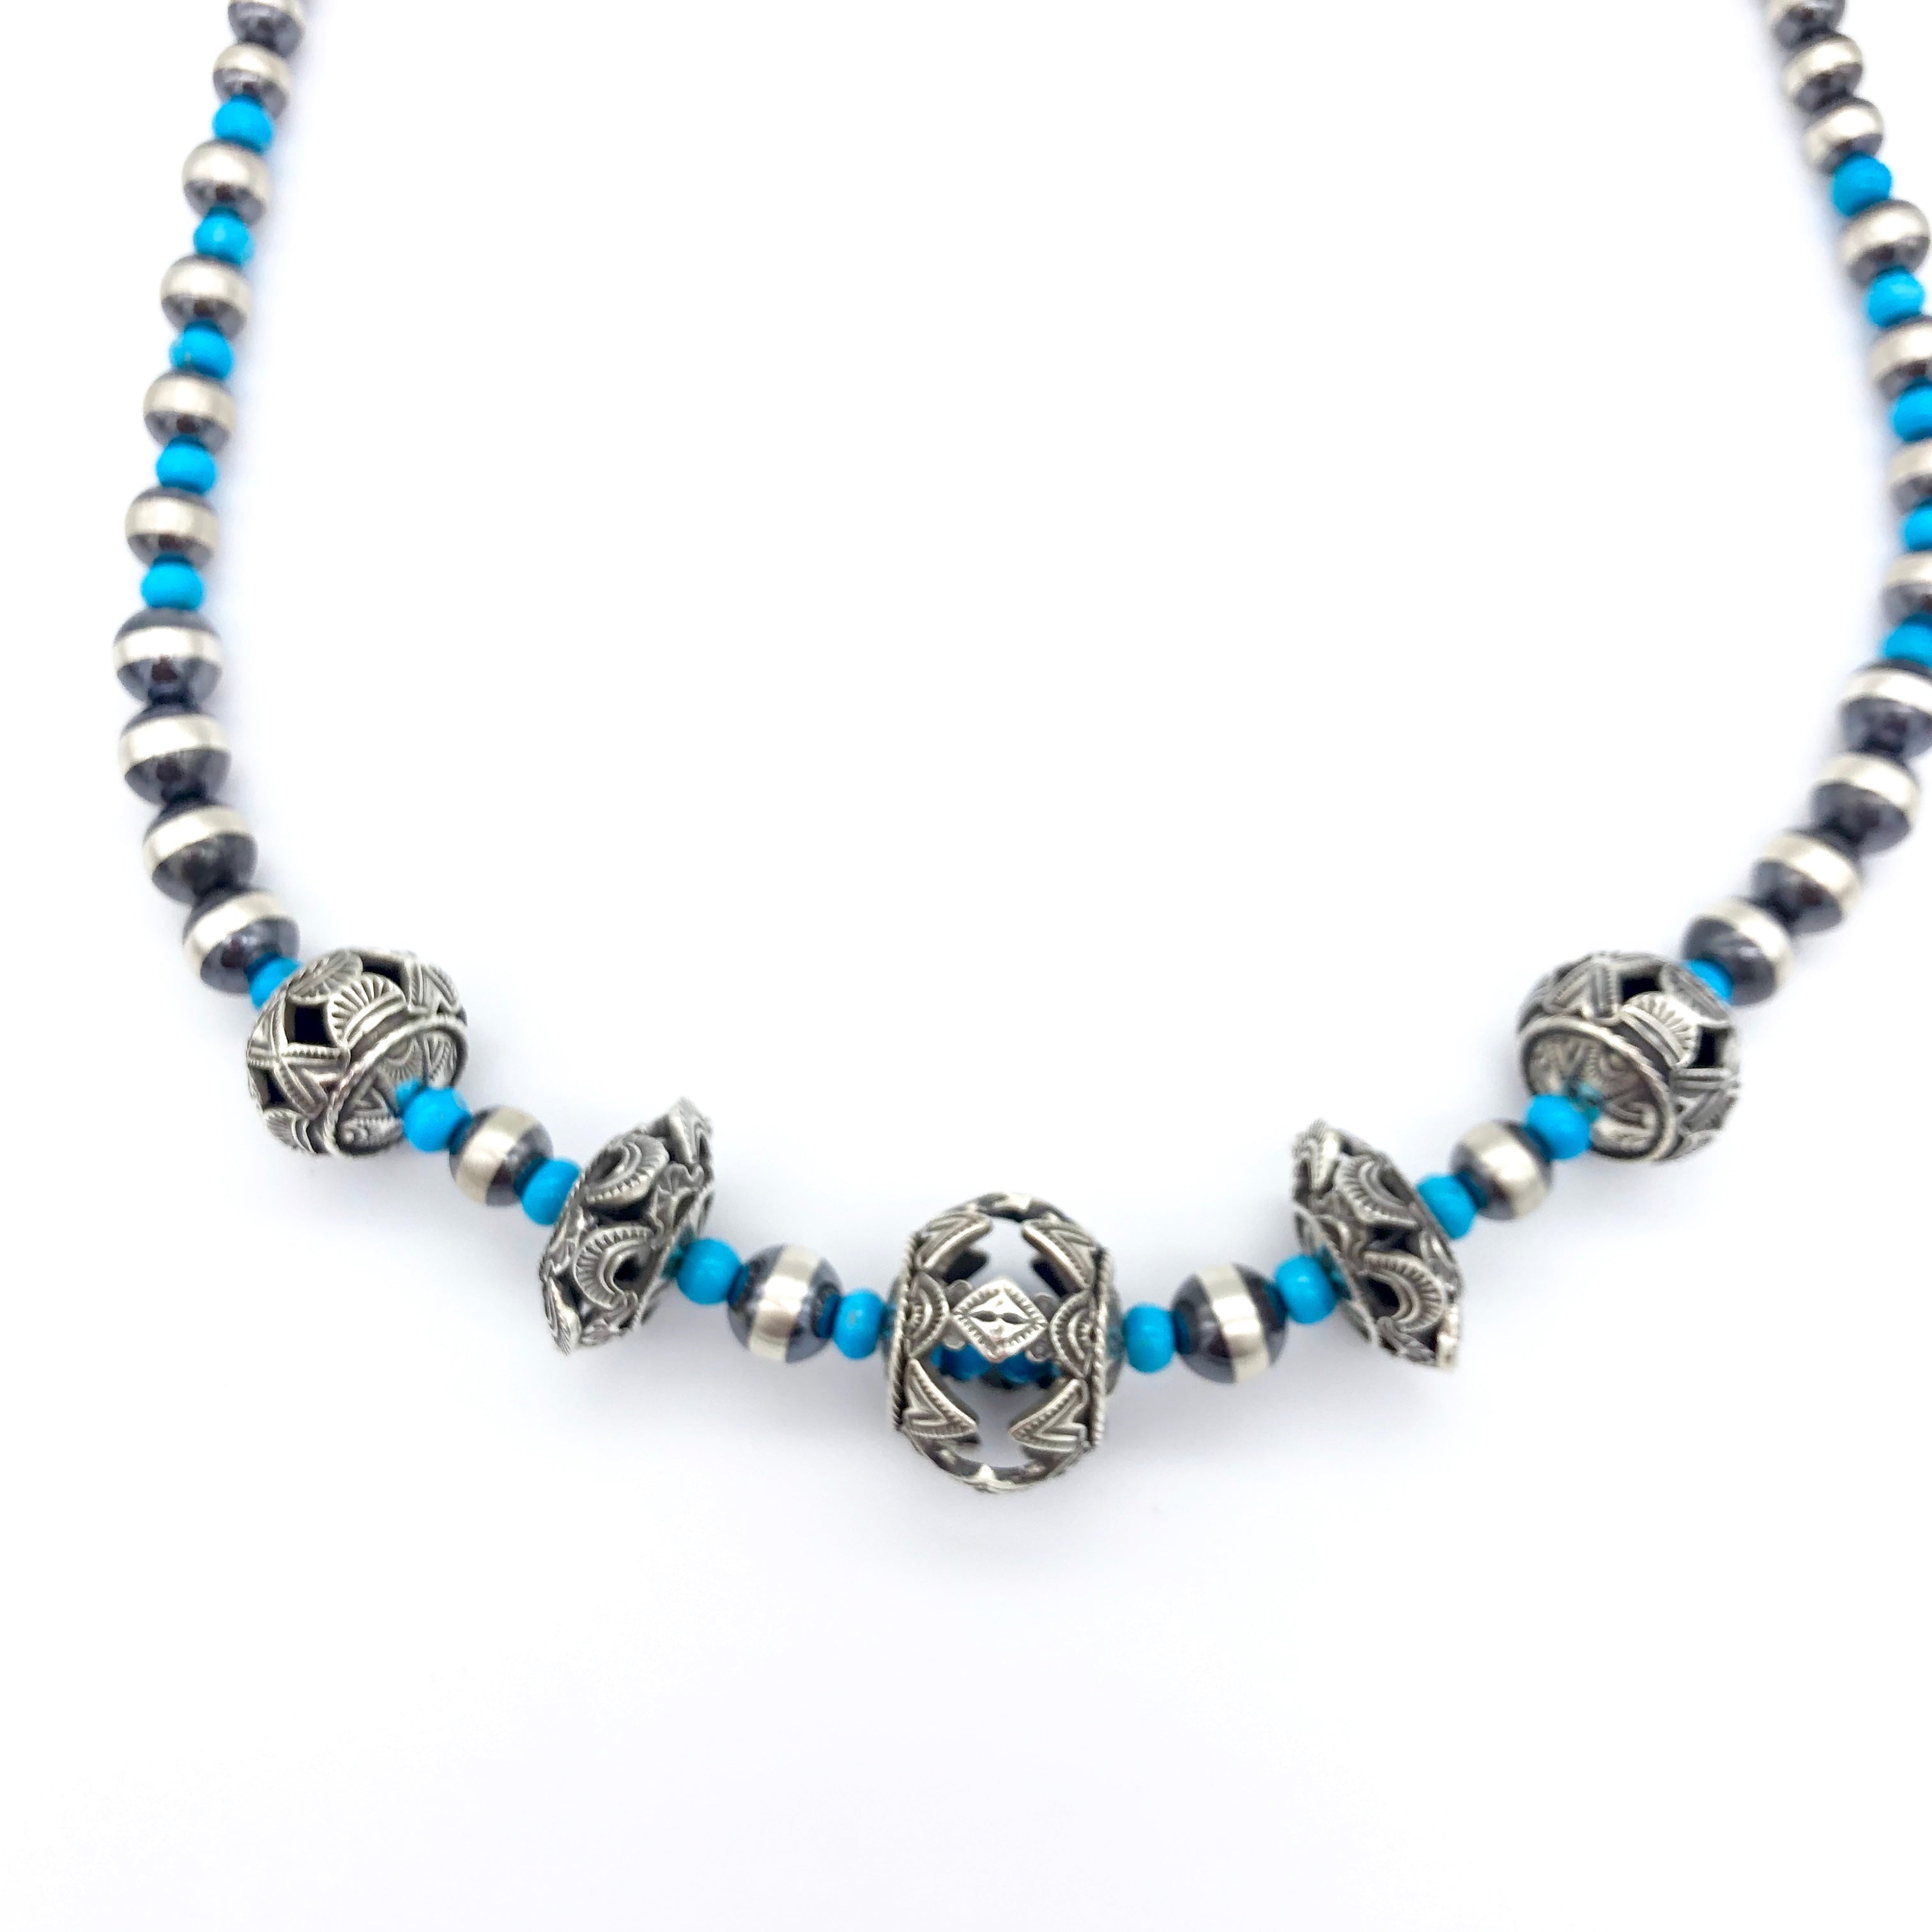 SP4 Santa Fe Pearls with Turquoise and Sterling Bead Necklace